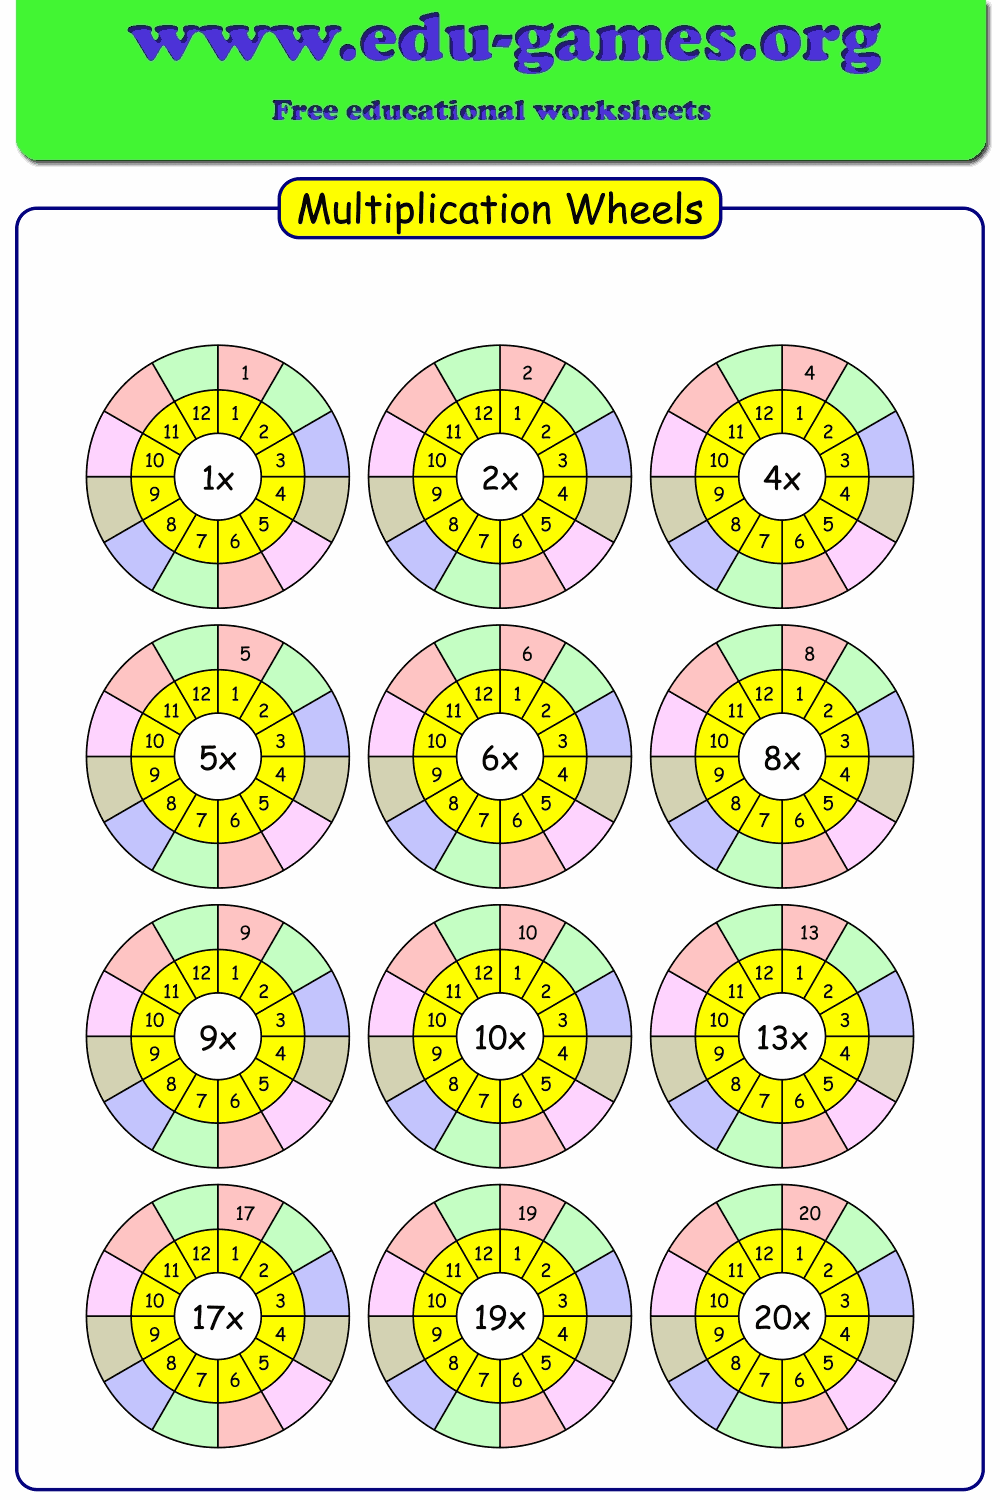 9 Times Table Multiplication Wheels